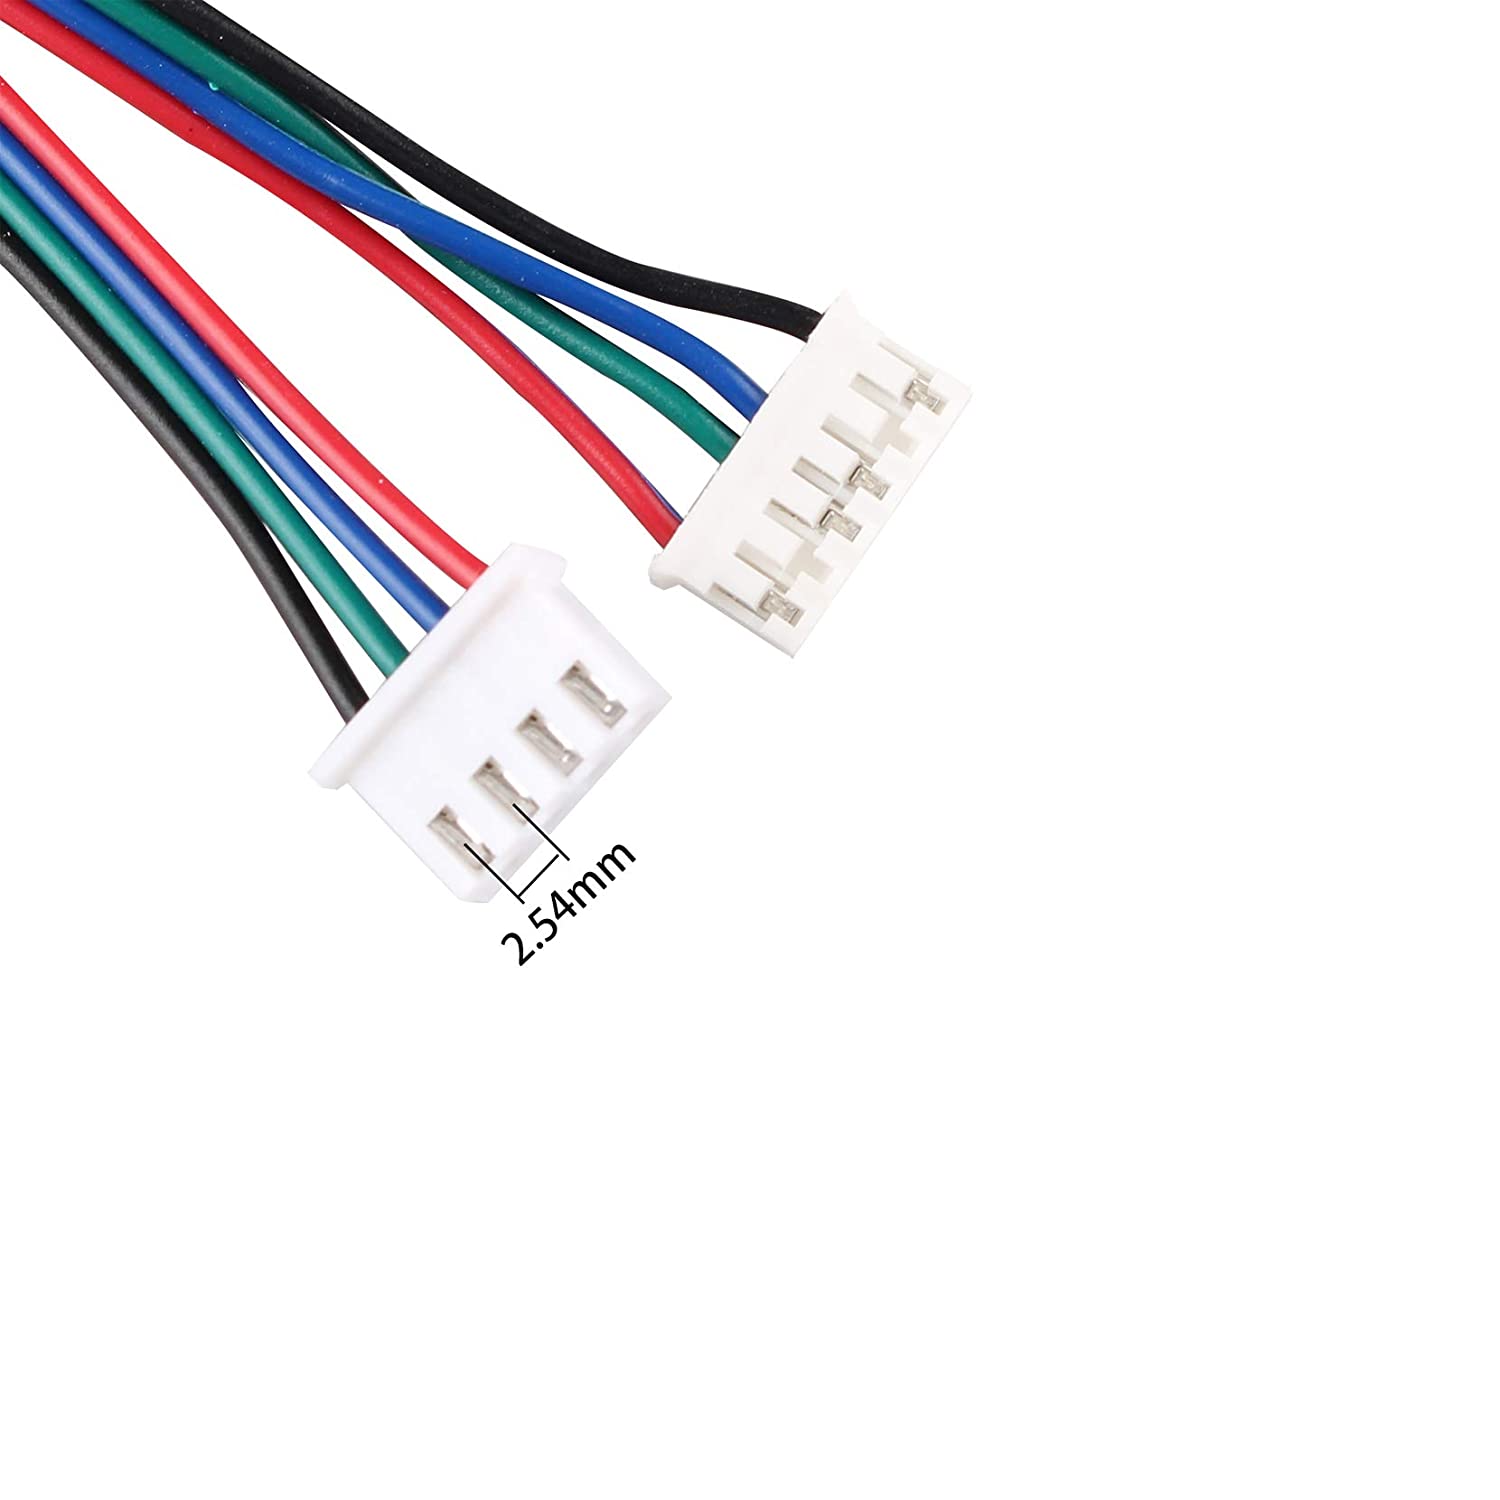 4pcs 2M Stepper Motor Cables 4Pin to XH2.0 6Pin White Terminal Parallel Motor Wires for 3D Printer Stepper Motor